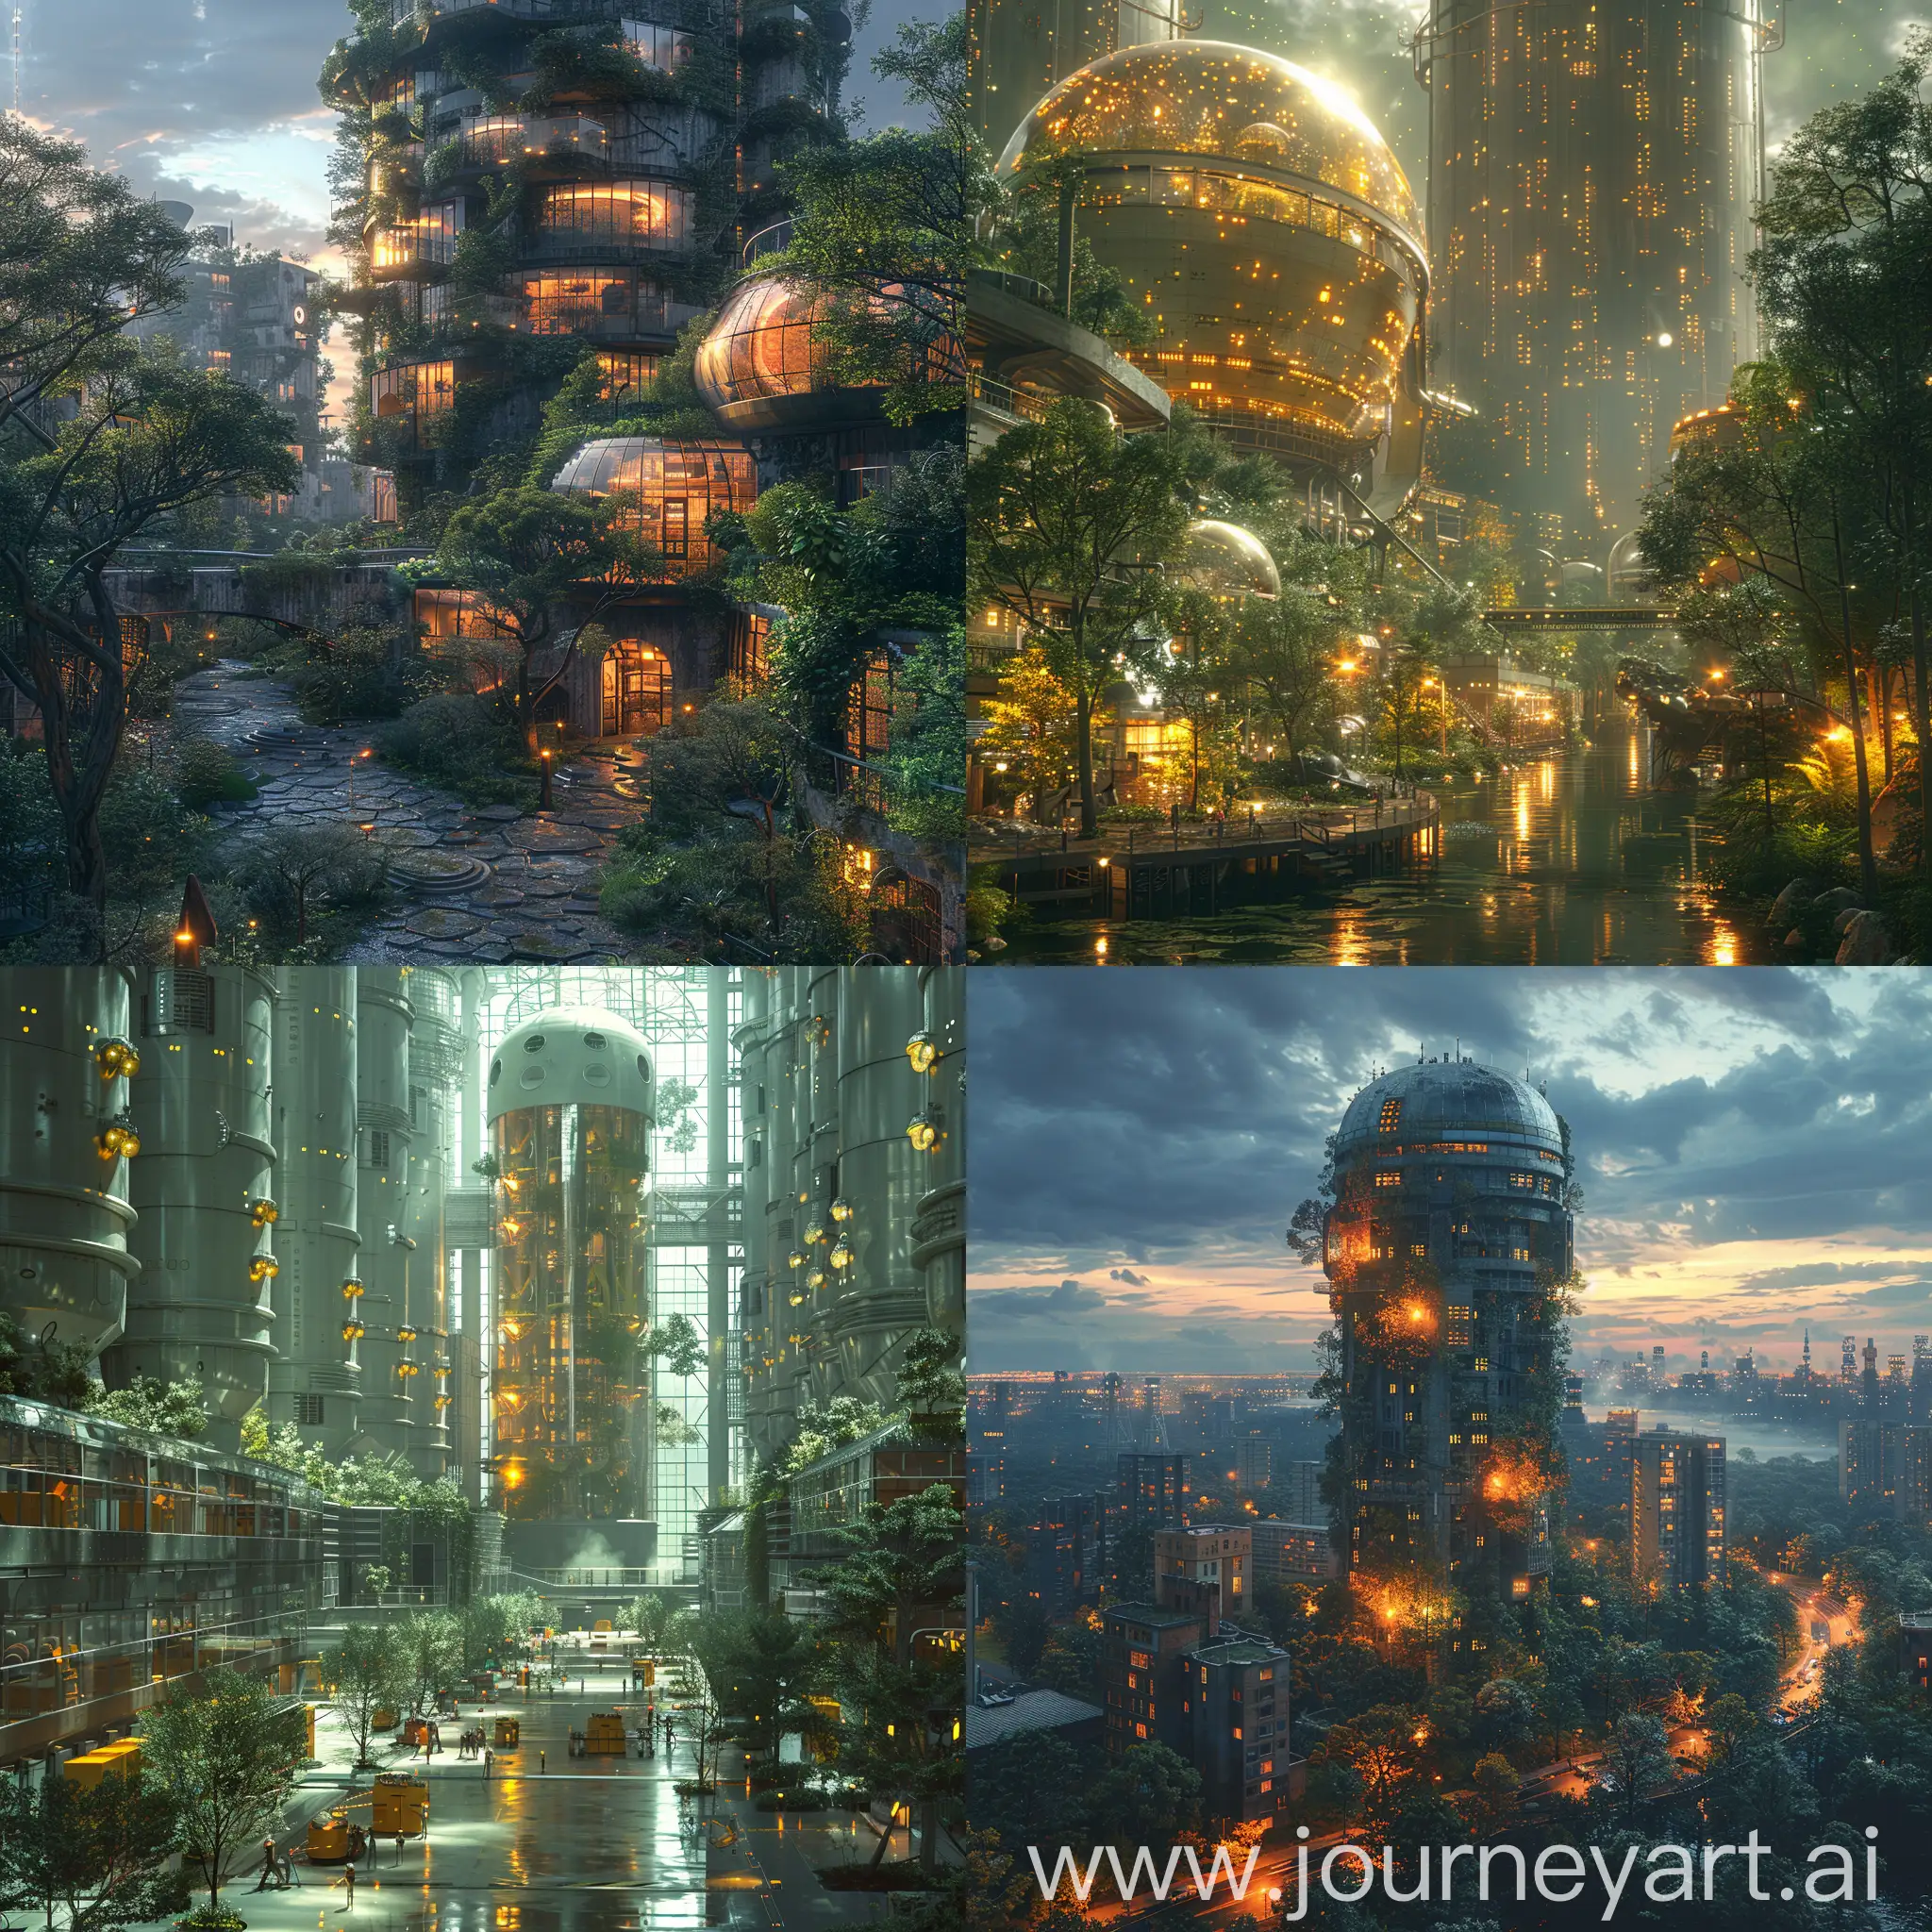 Futuristic-Chernobyl-Advancing-Sustainability-and-Technology-in-a-PostApocalyptic-Landscape